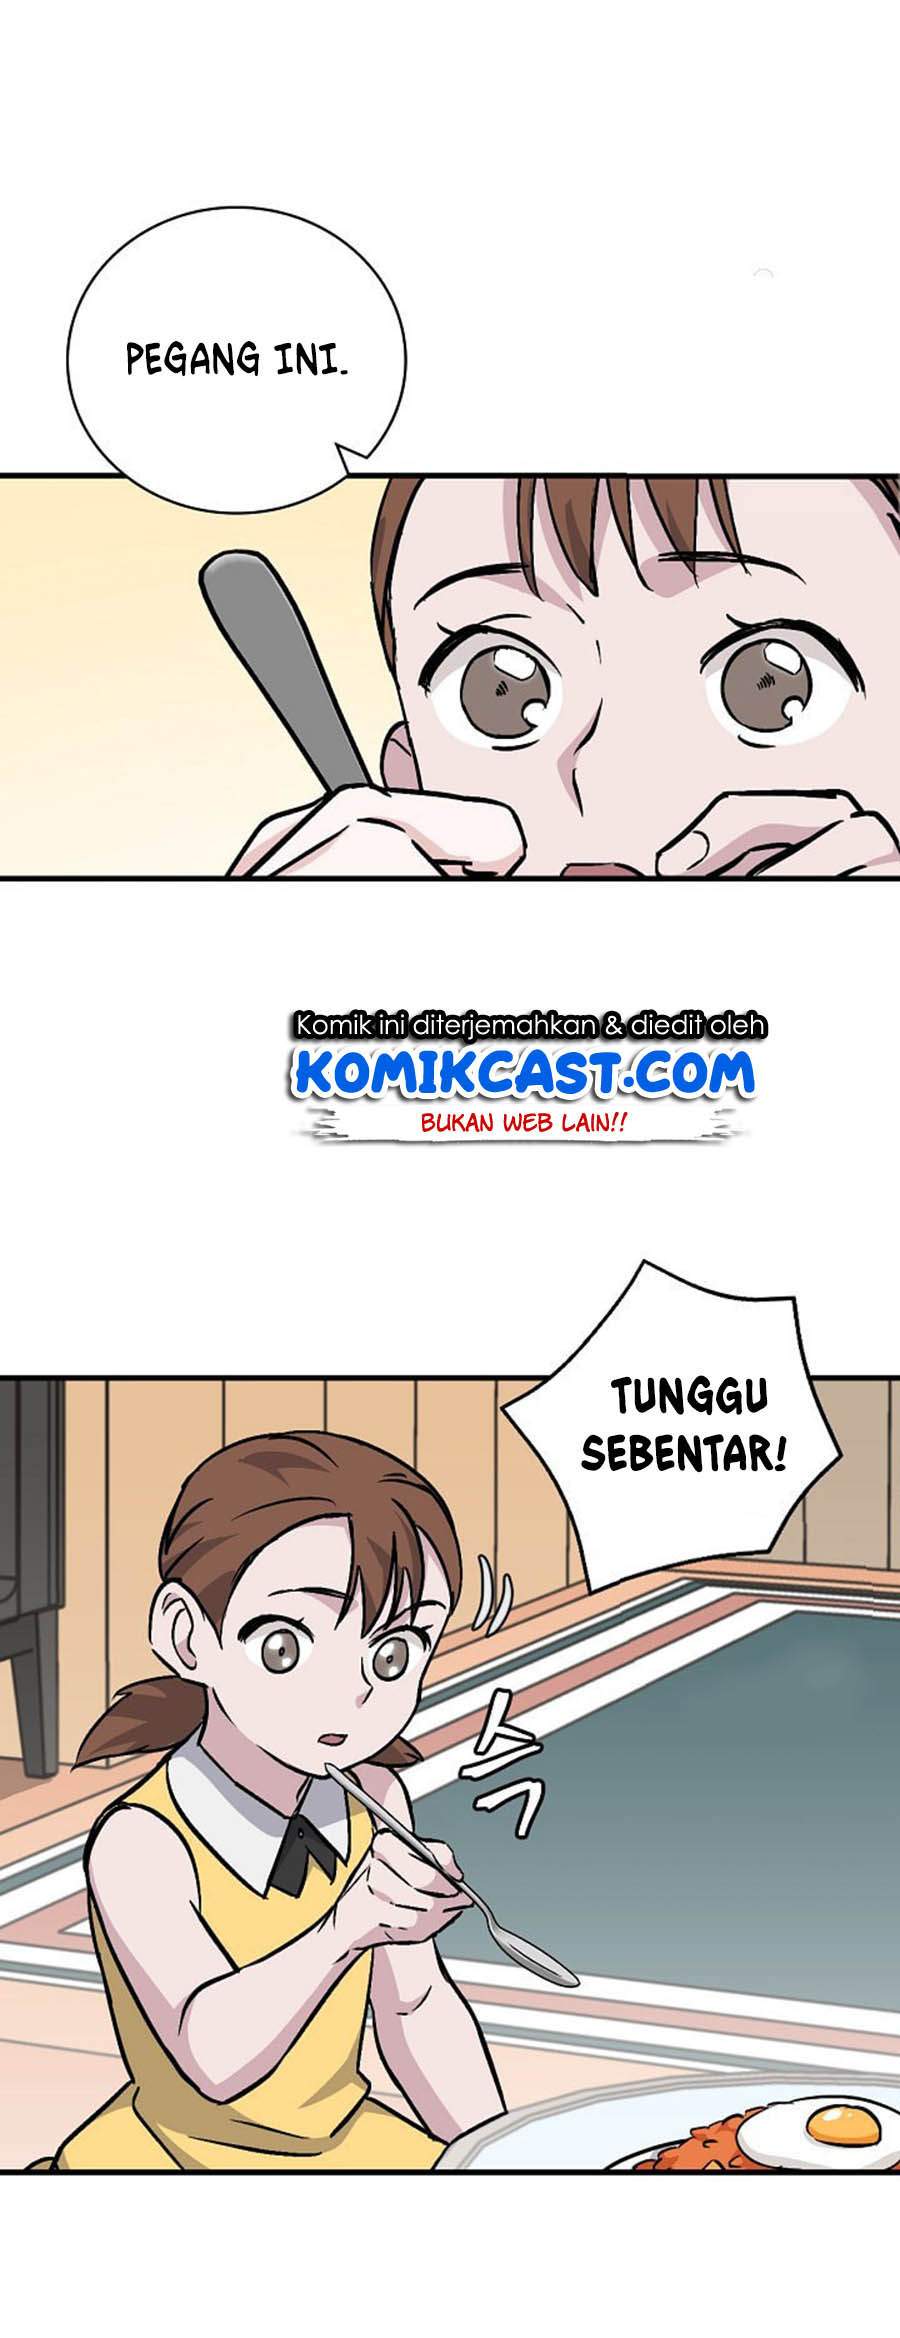 Leveling Up, By Only Eating! (Gourmet Gaming) Chapter 34 - 387